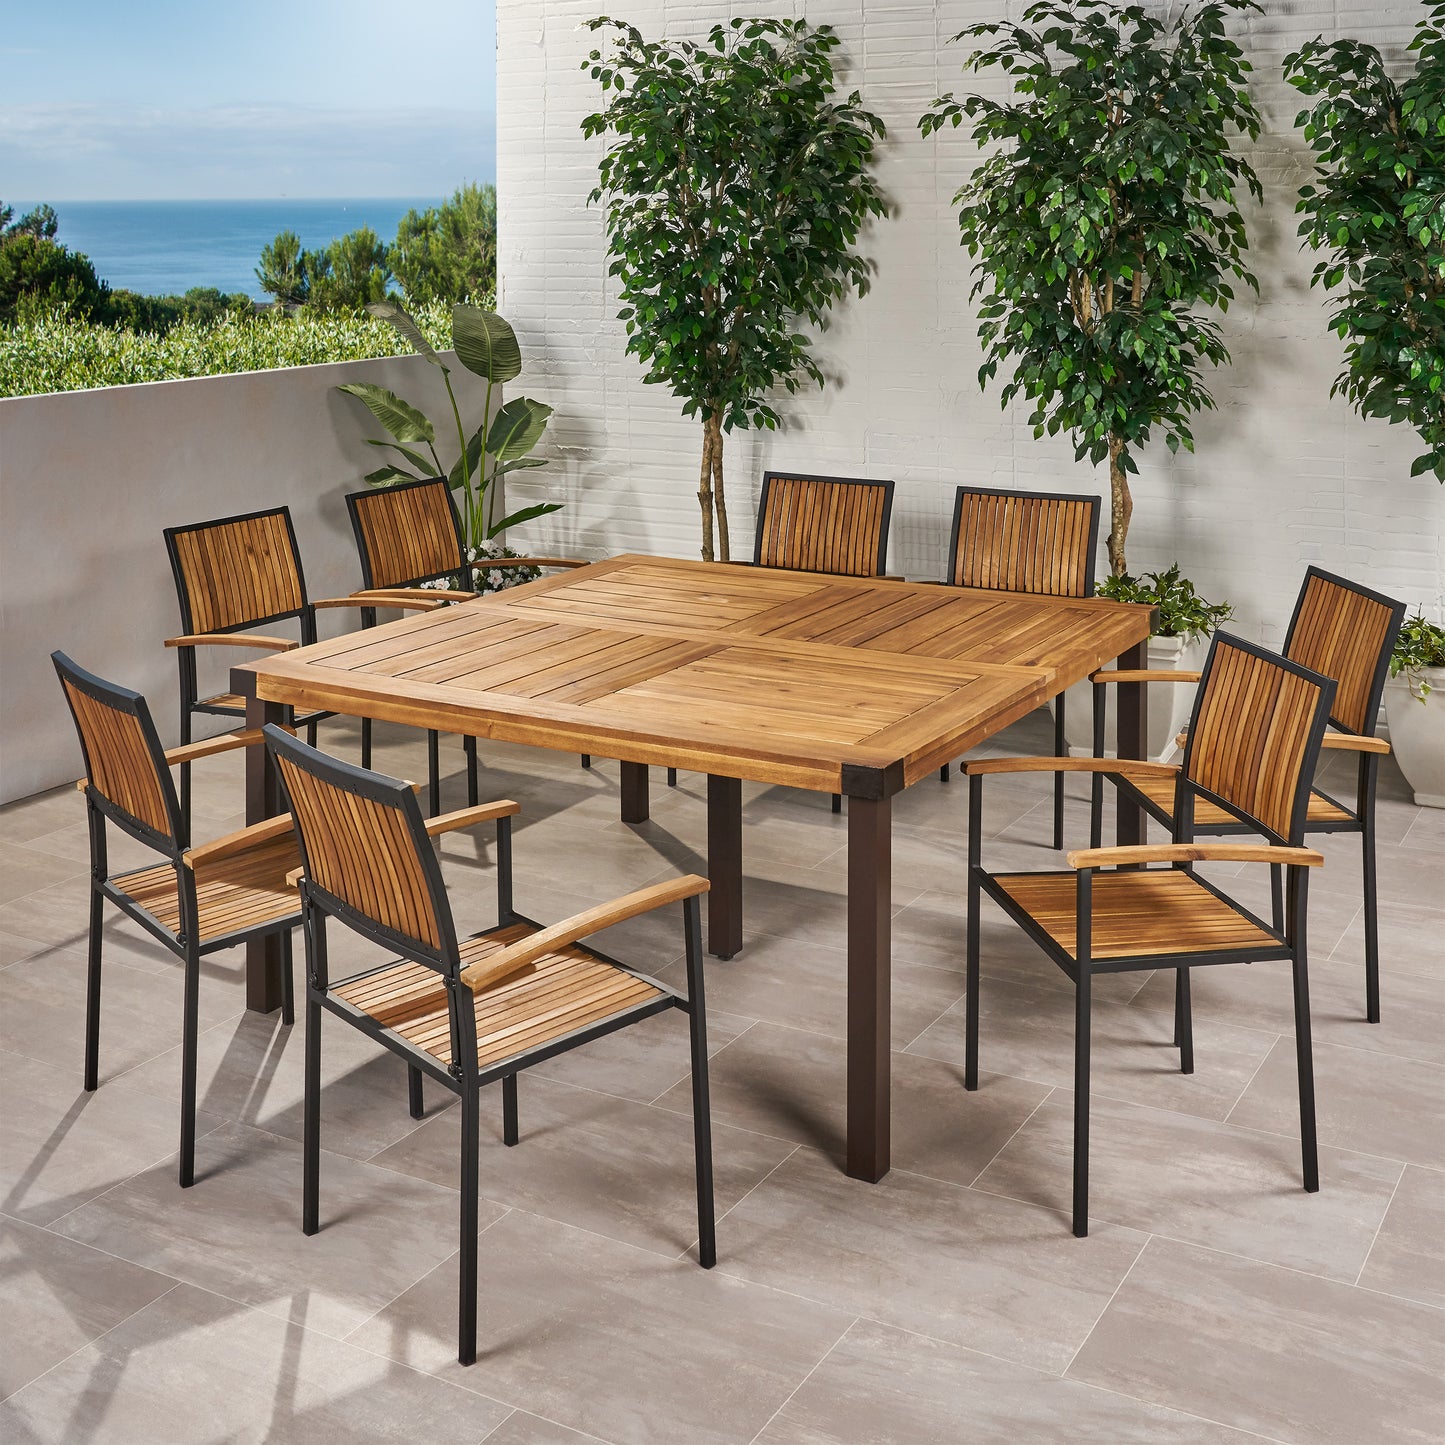 Maggie Outdoor 8 Seater Acacia Wood Dining Set